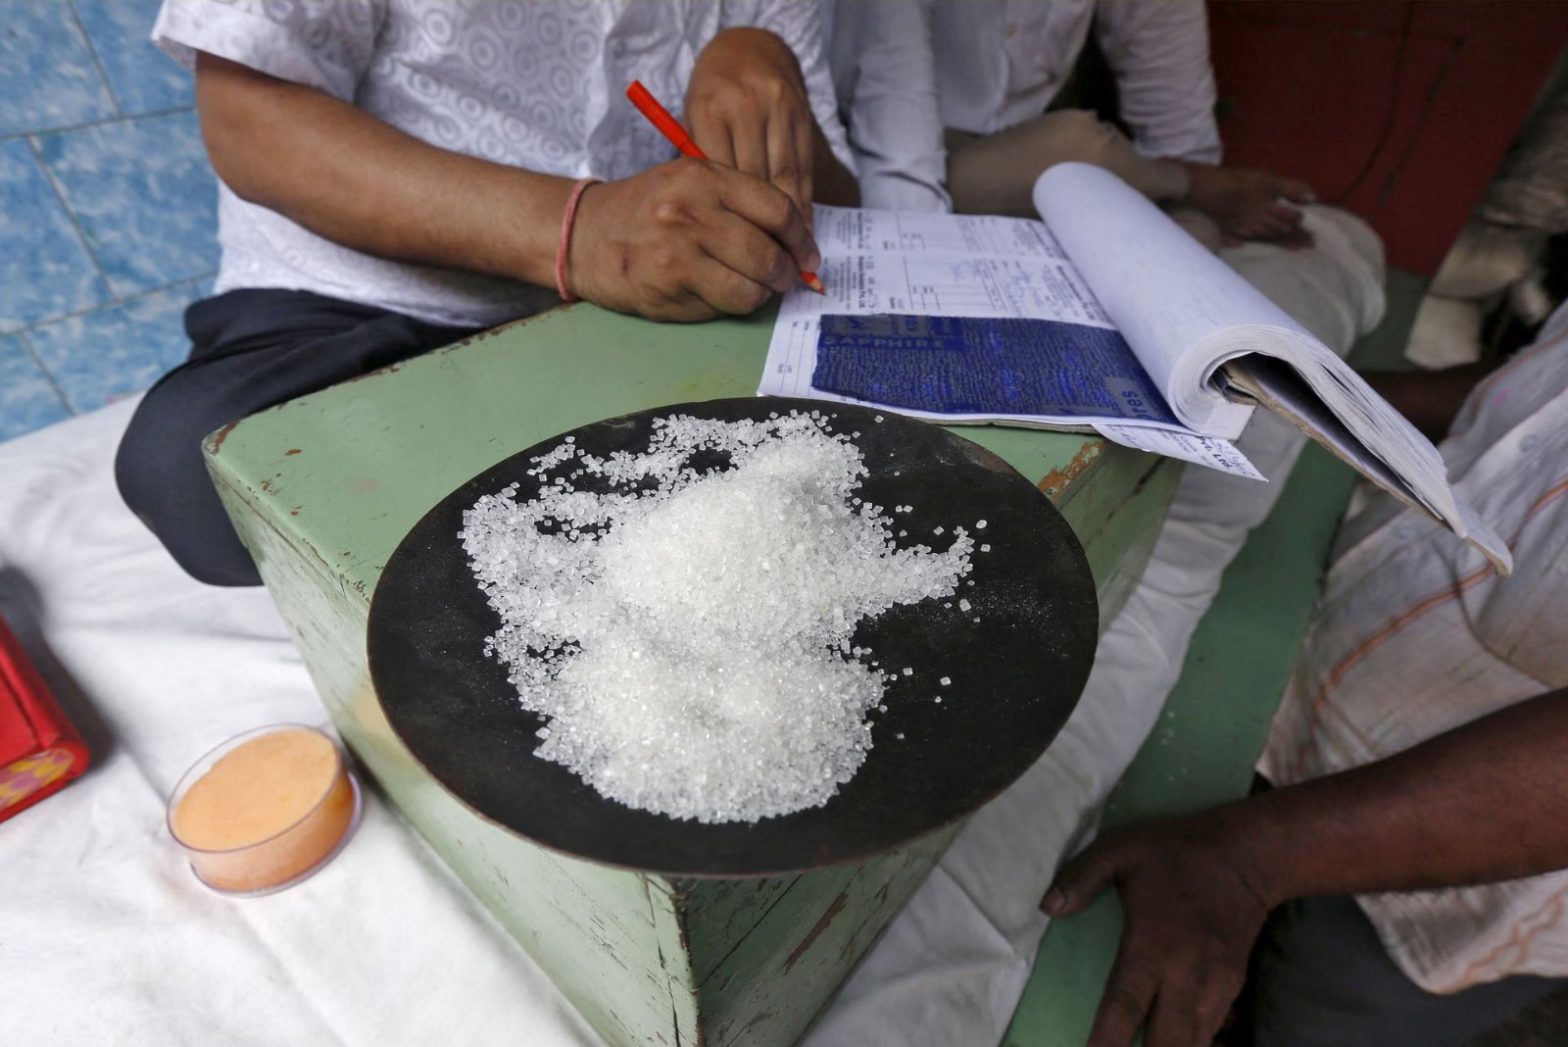 India's sugar output drops 5.4% y/y as mills close early